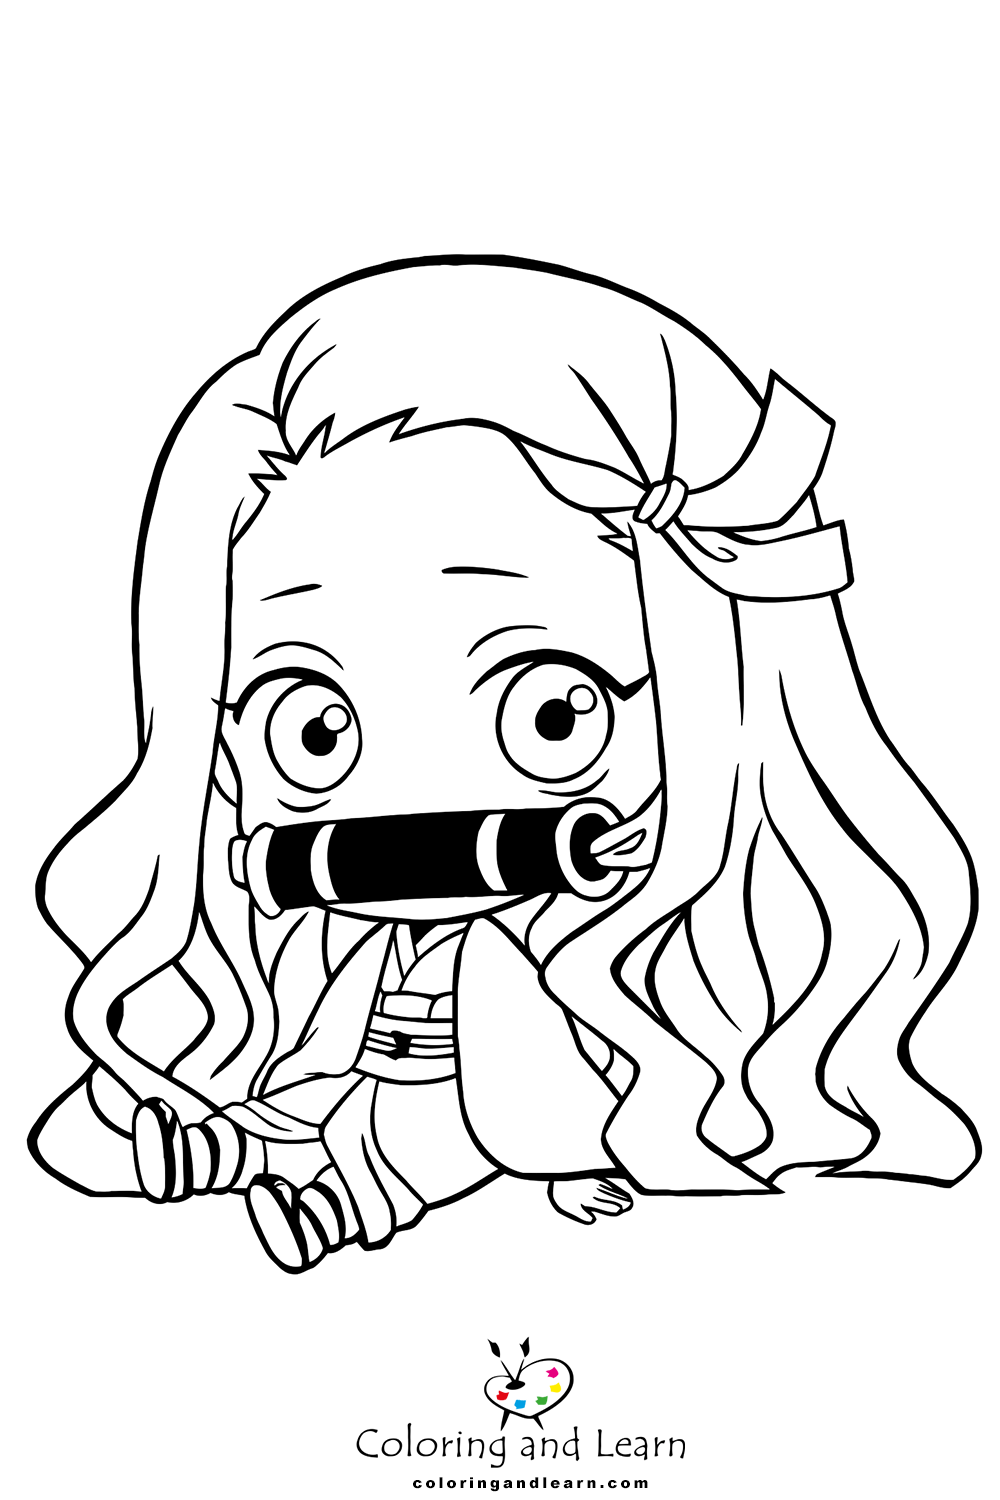 Nezuko (Anime Character) Coloring Pages : r/coloringpages